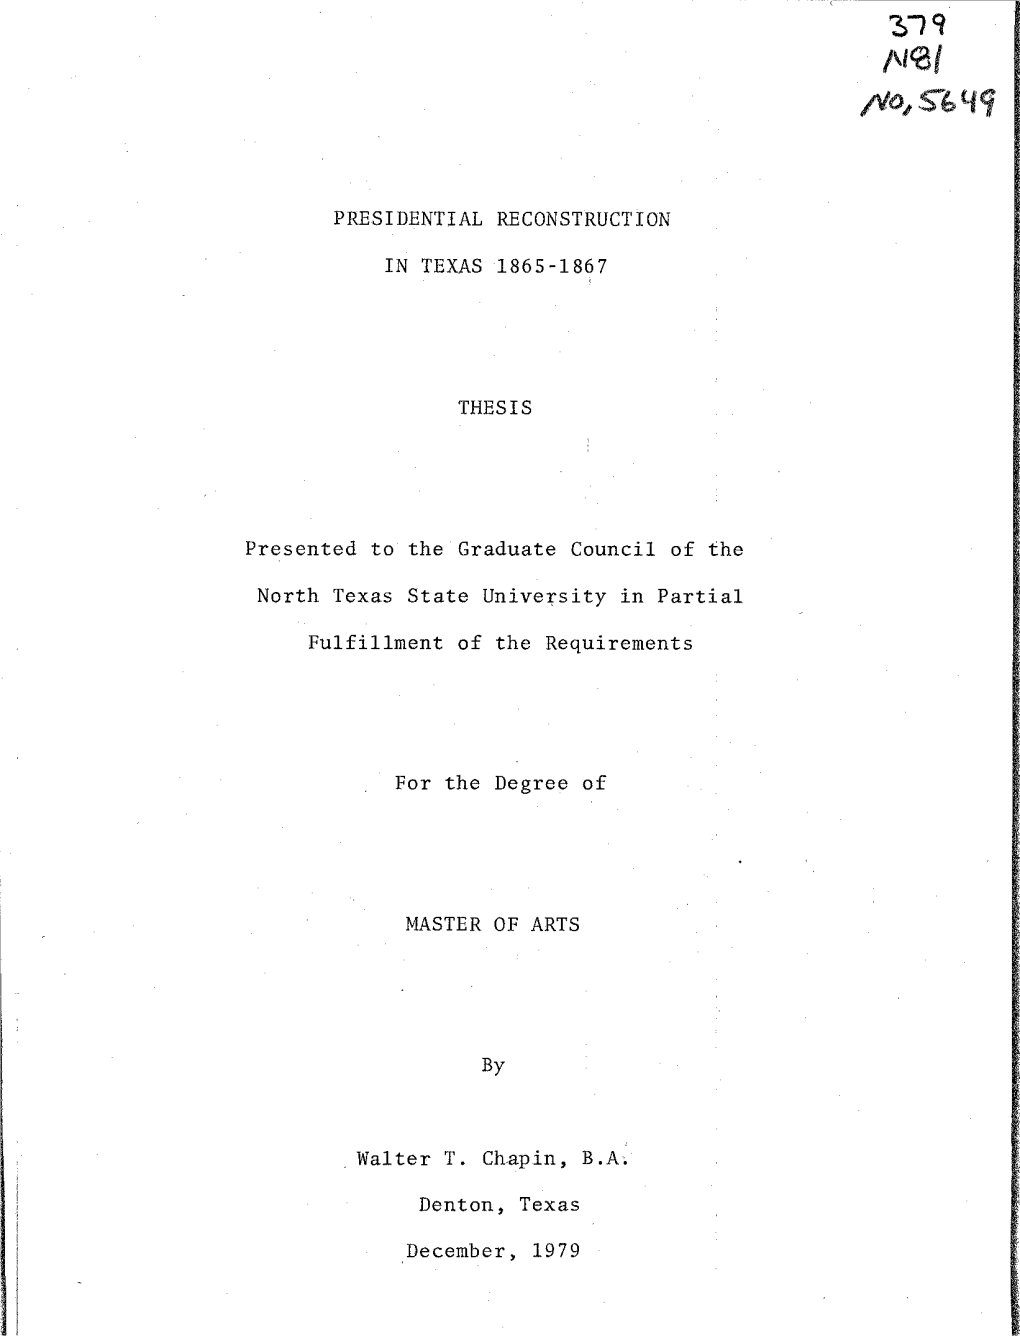 Presidential Reconstruction in Texas 1865-1867 Thesis